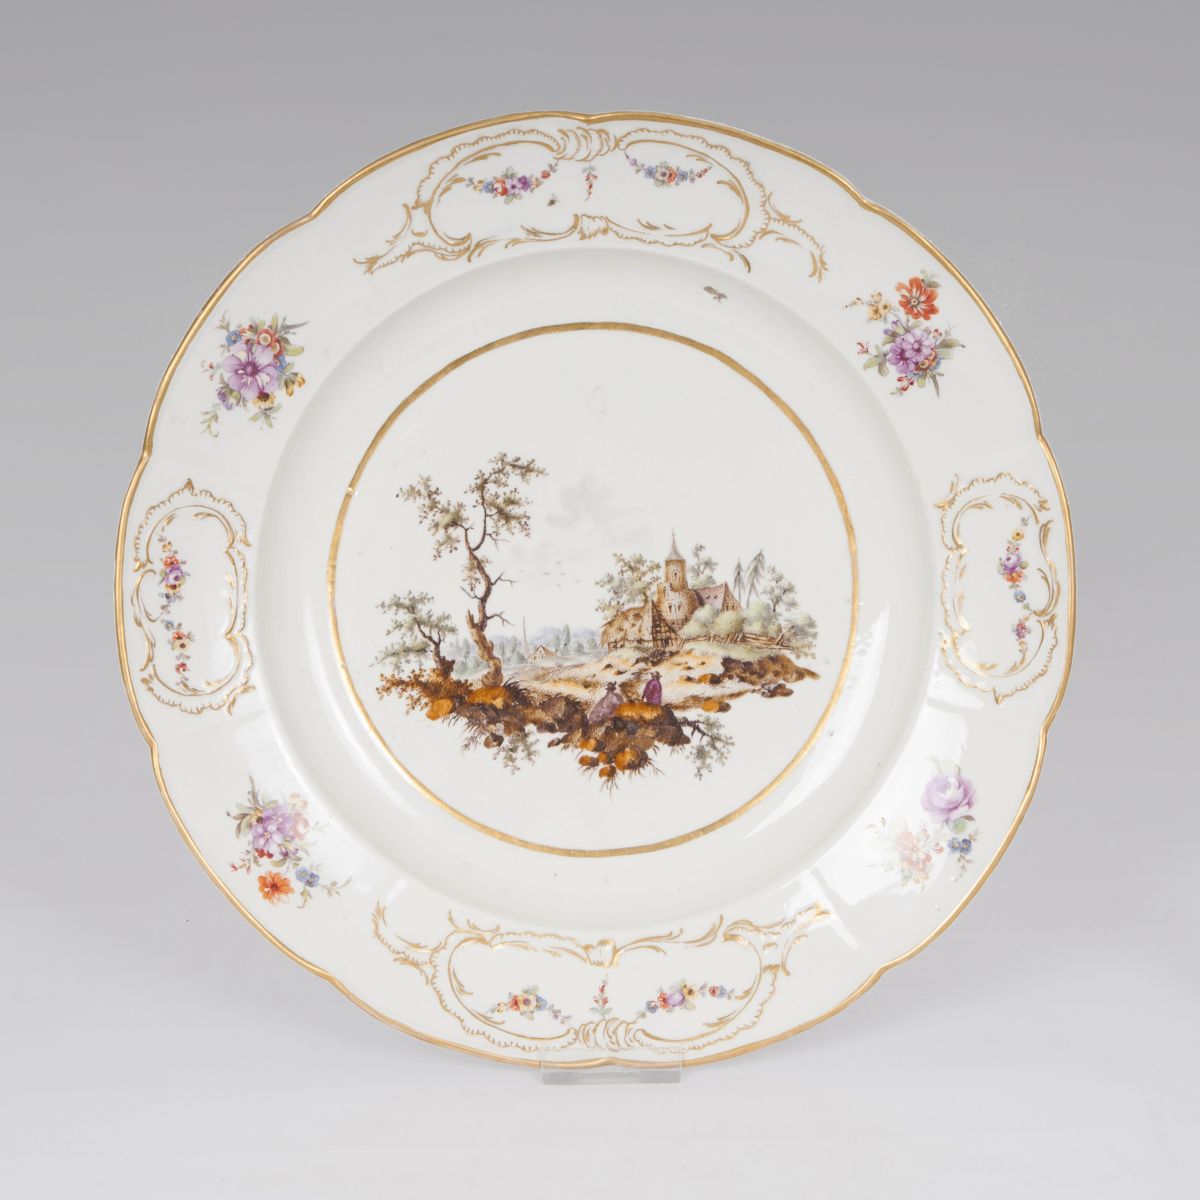 A large plate with idyllic landscape